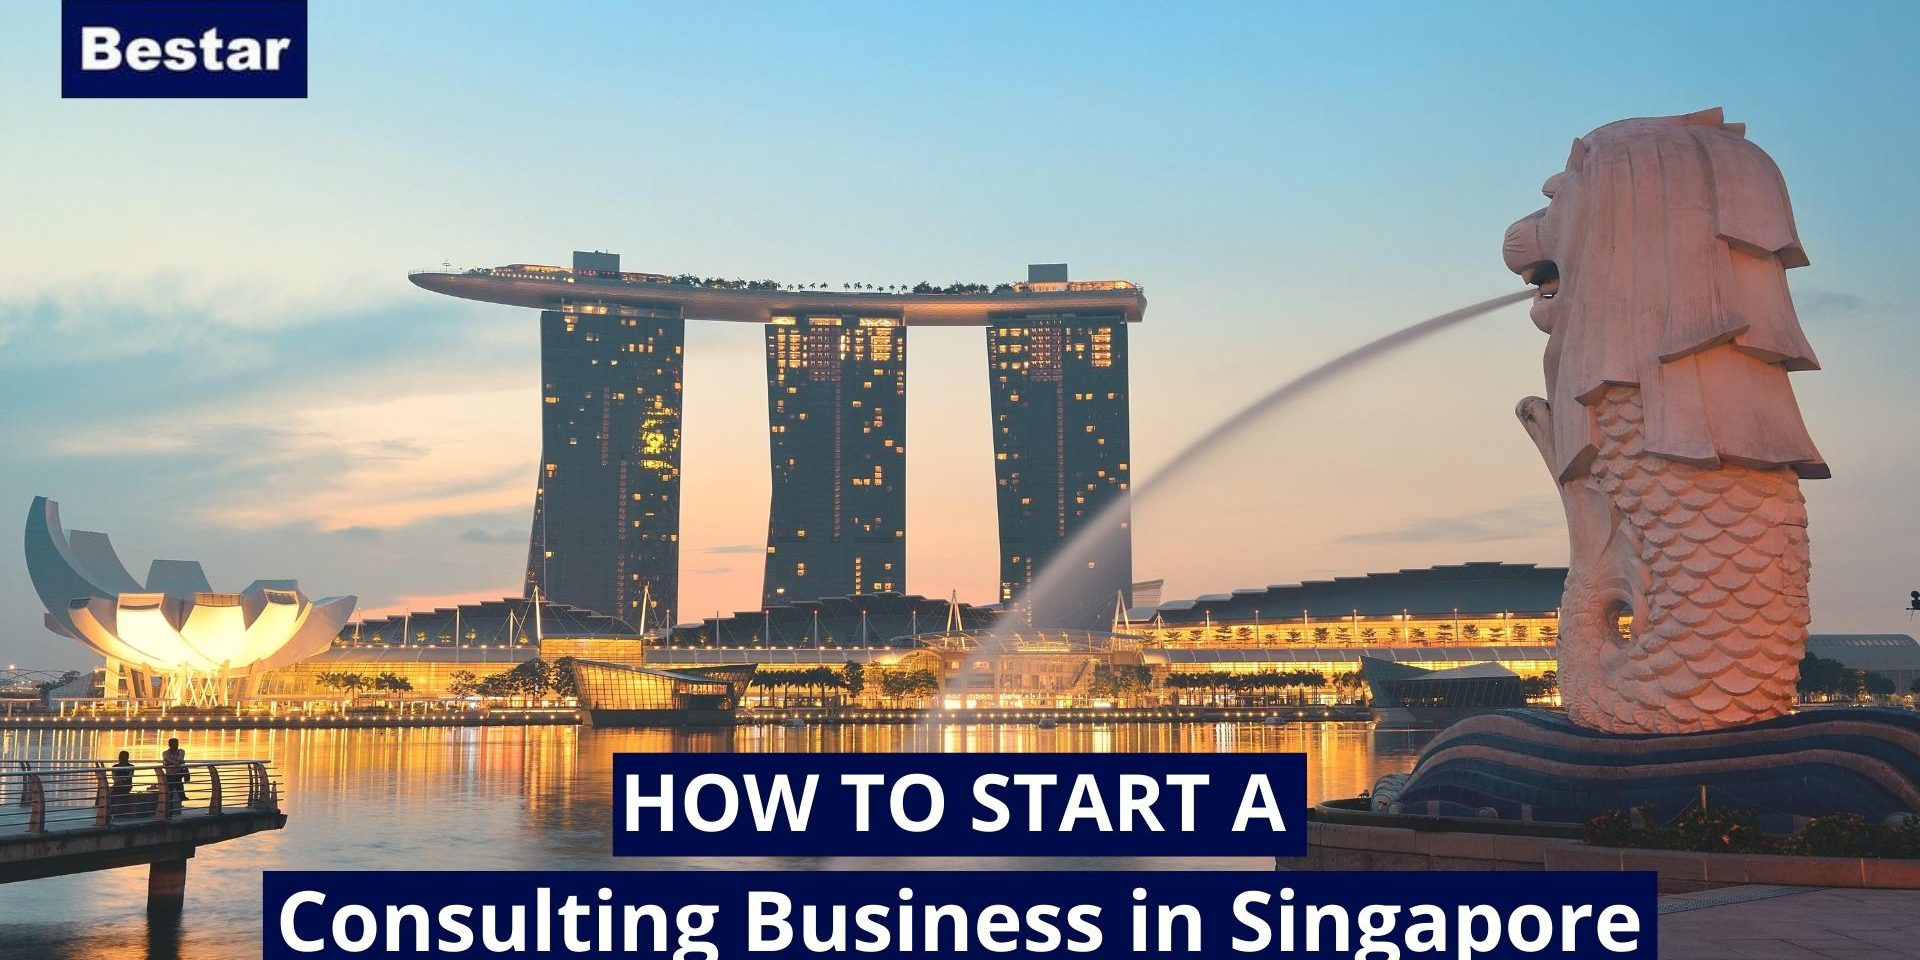 How to start a Consulting Business in Singapore?